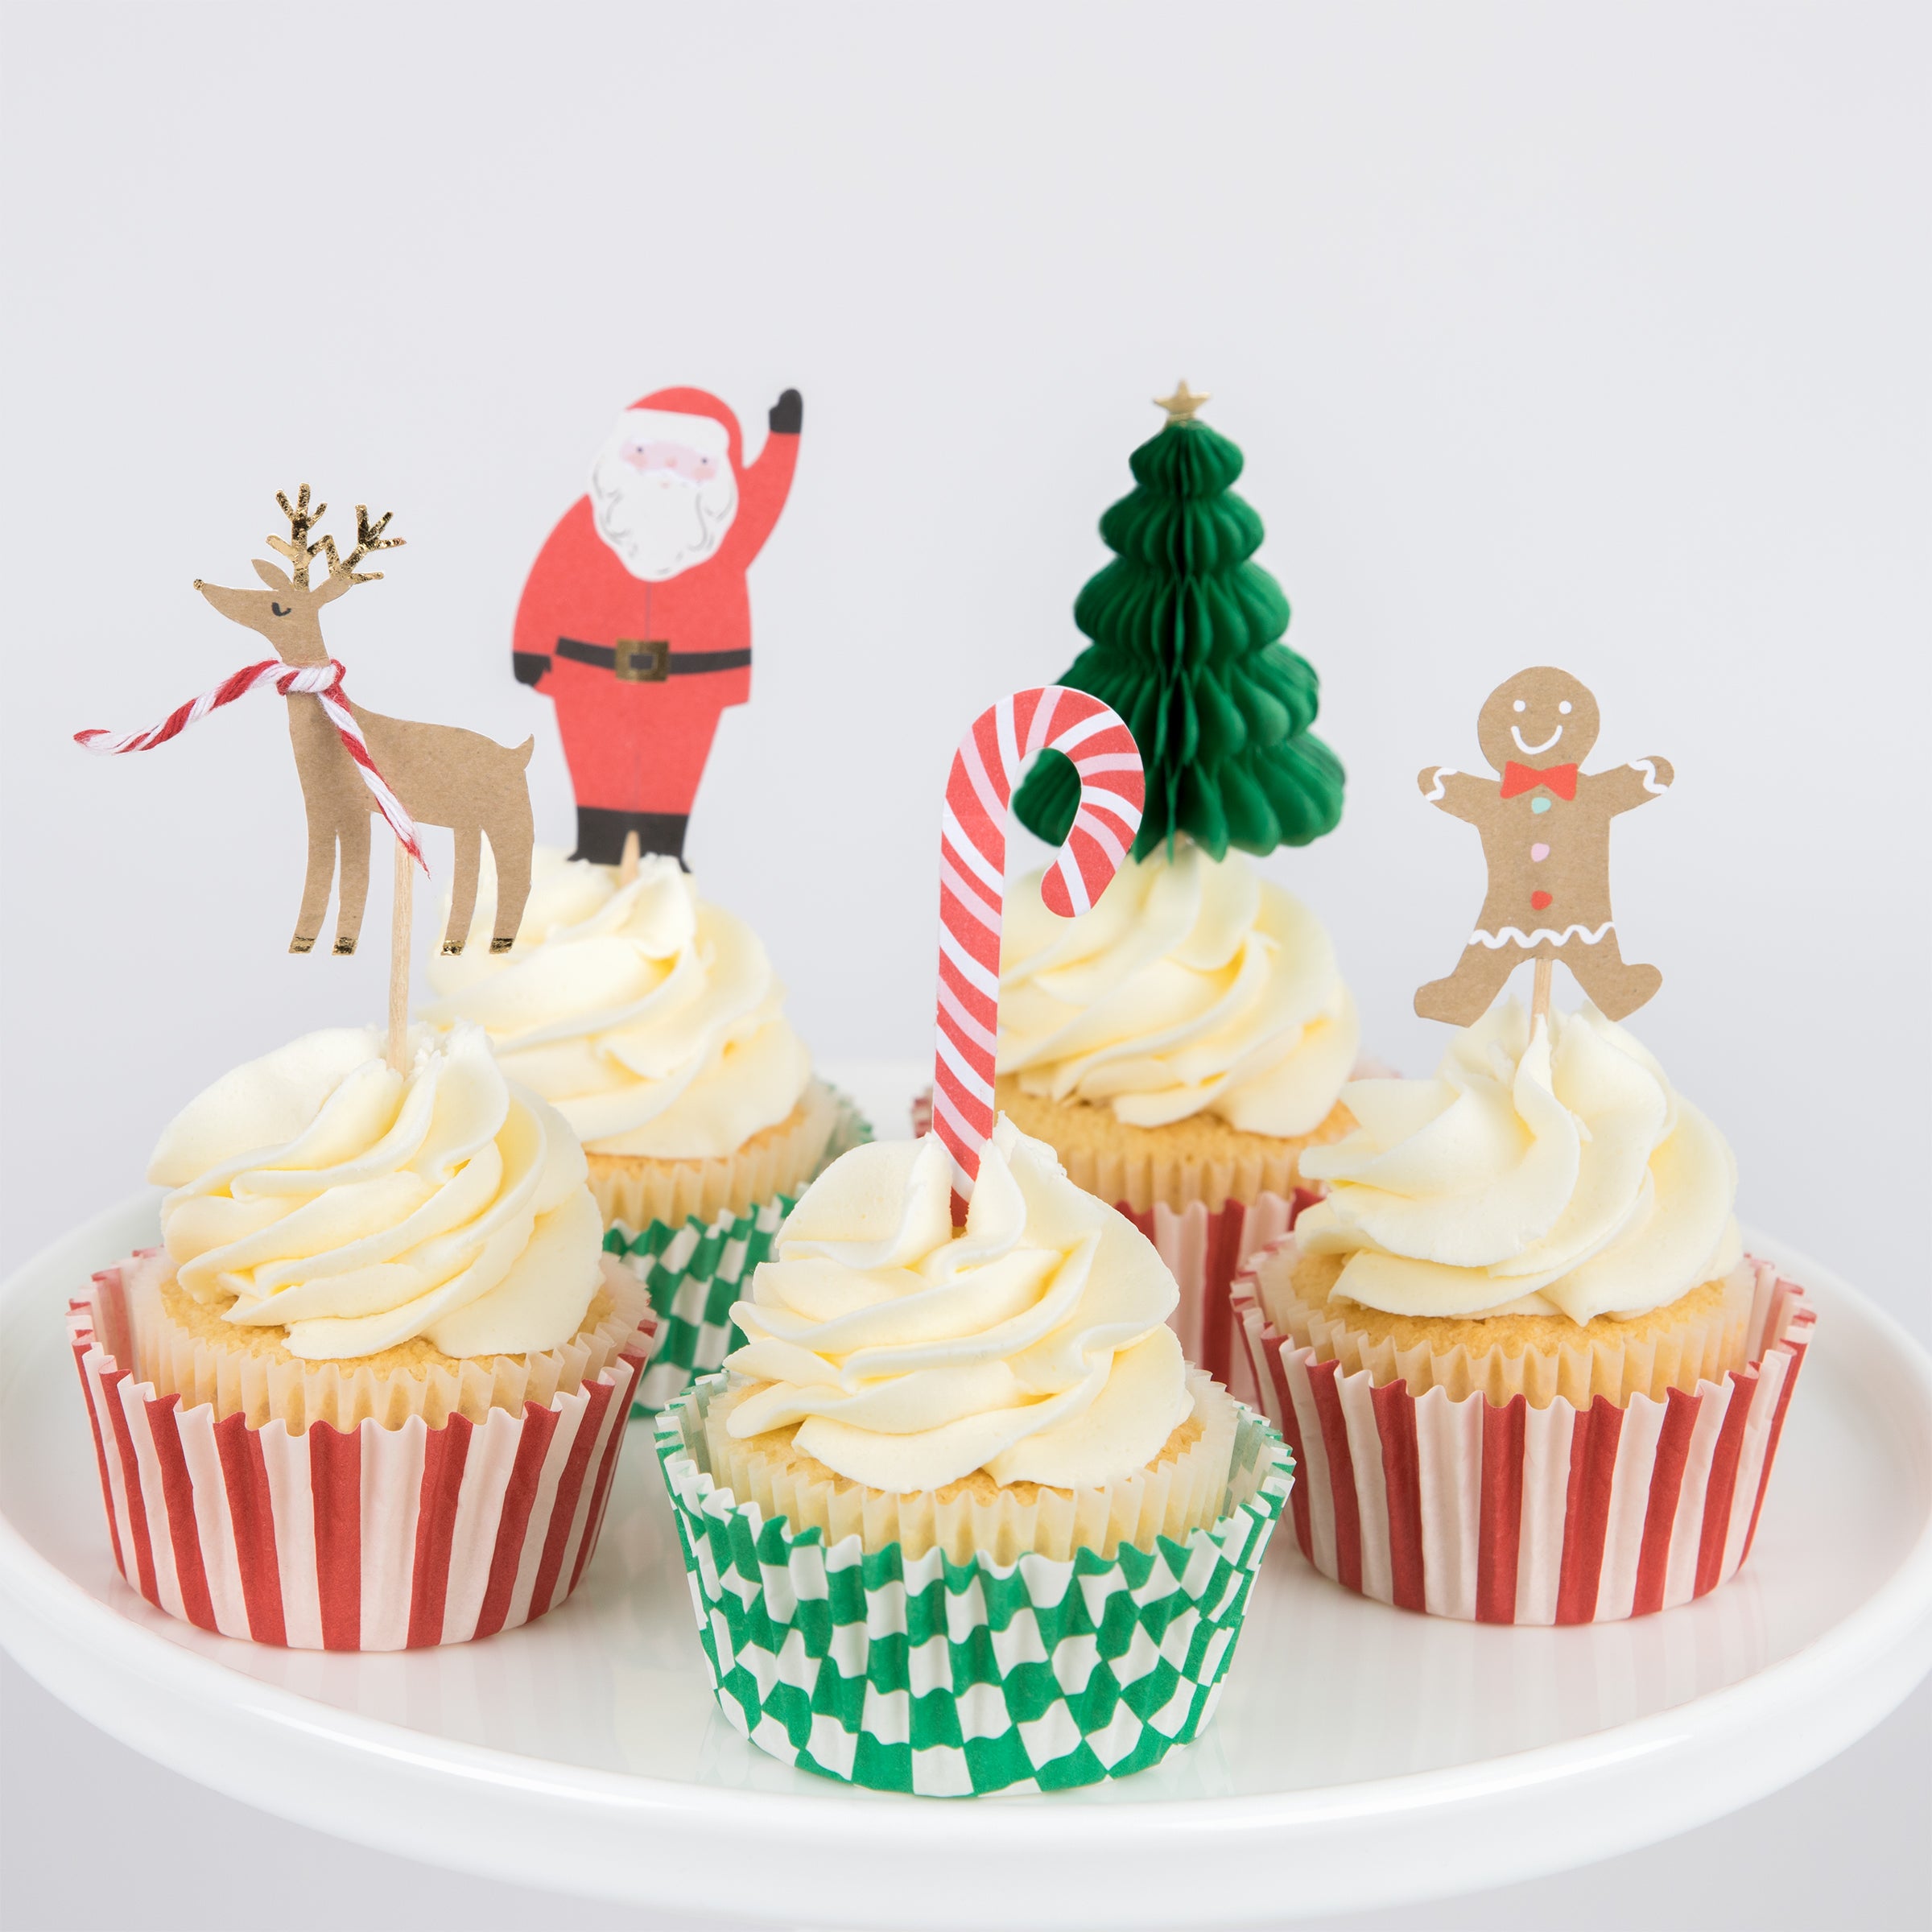 Make Christmas cupcakes with our Christmas cake toppers and cupcake cases, in a kit designed to look like a merry festive house.